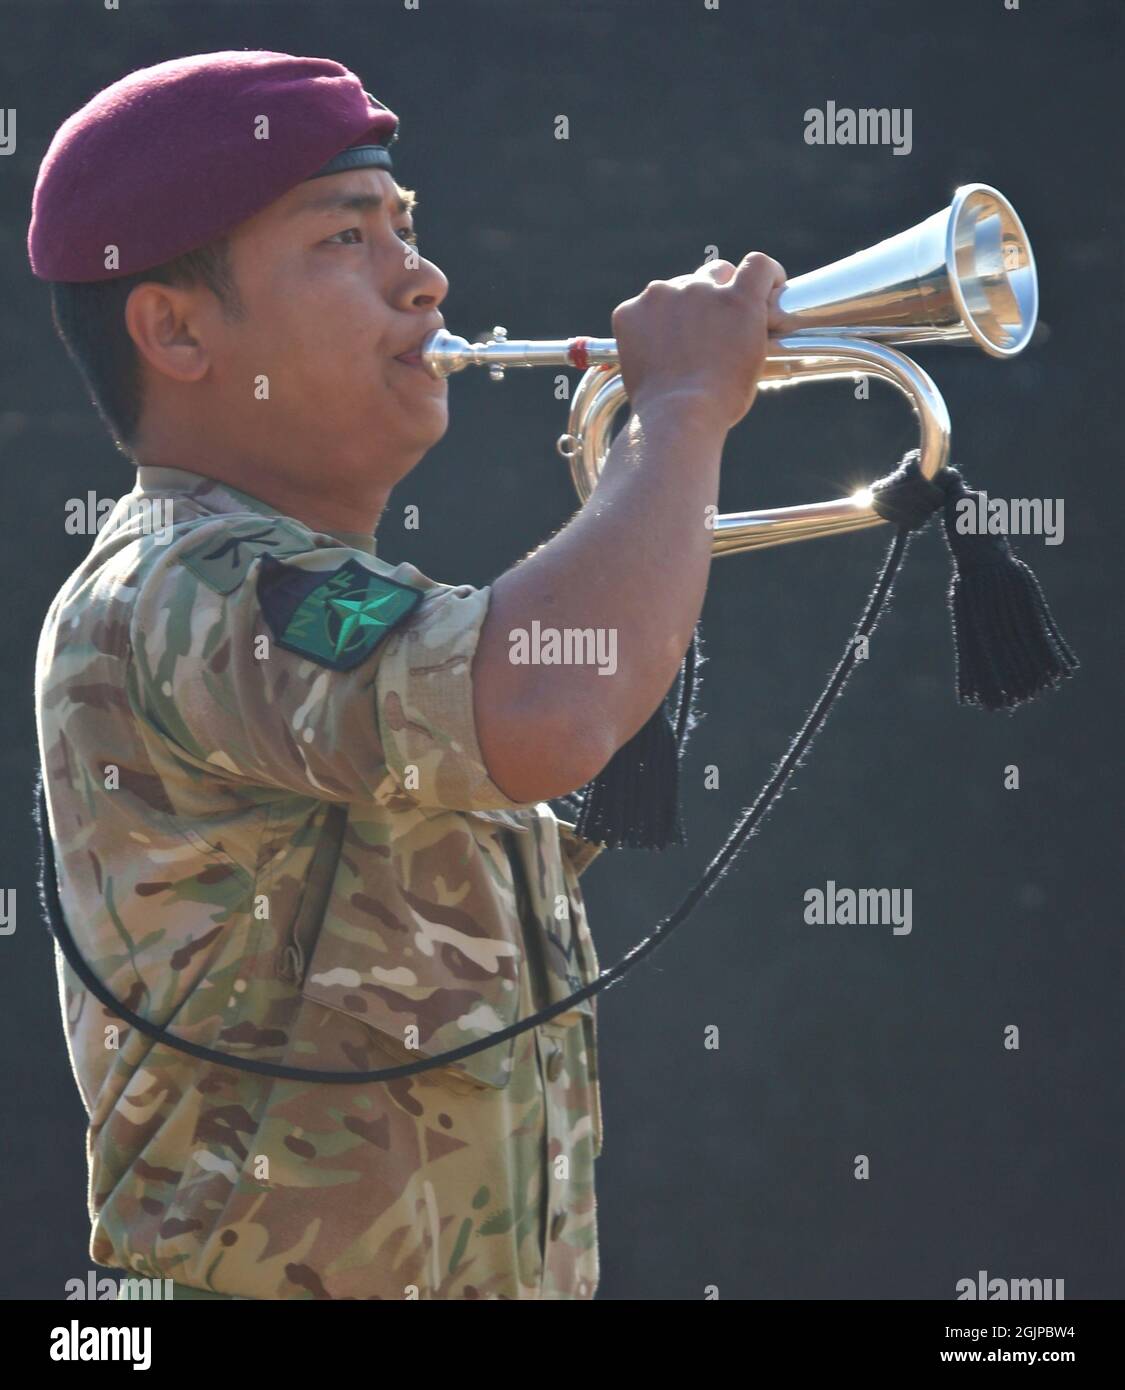 Ferizaj, Kosovo. 11th Sep, 2021. LCpl Neshum Tamang from the 1st Royal Gurkha Rifle Regiment, plays taps during a remembrance event on the 20th anniversary of the 9/11 terrorist attacks at Camp Bondsteel September 11, 2021 in Ferizaj, Kosovo. The event commemorates the nearly 3,000 people killed by terrorists on September 11th, 2001. Credit: Capt. Mikel Arcovitch/U.S. Army/Alamy Live News Stock Photo